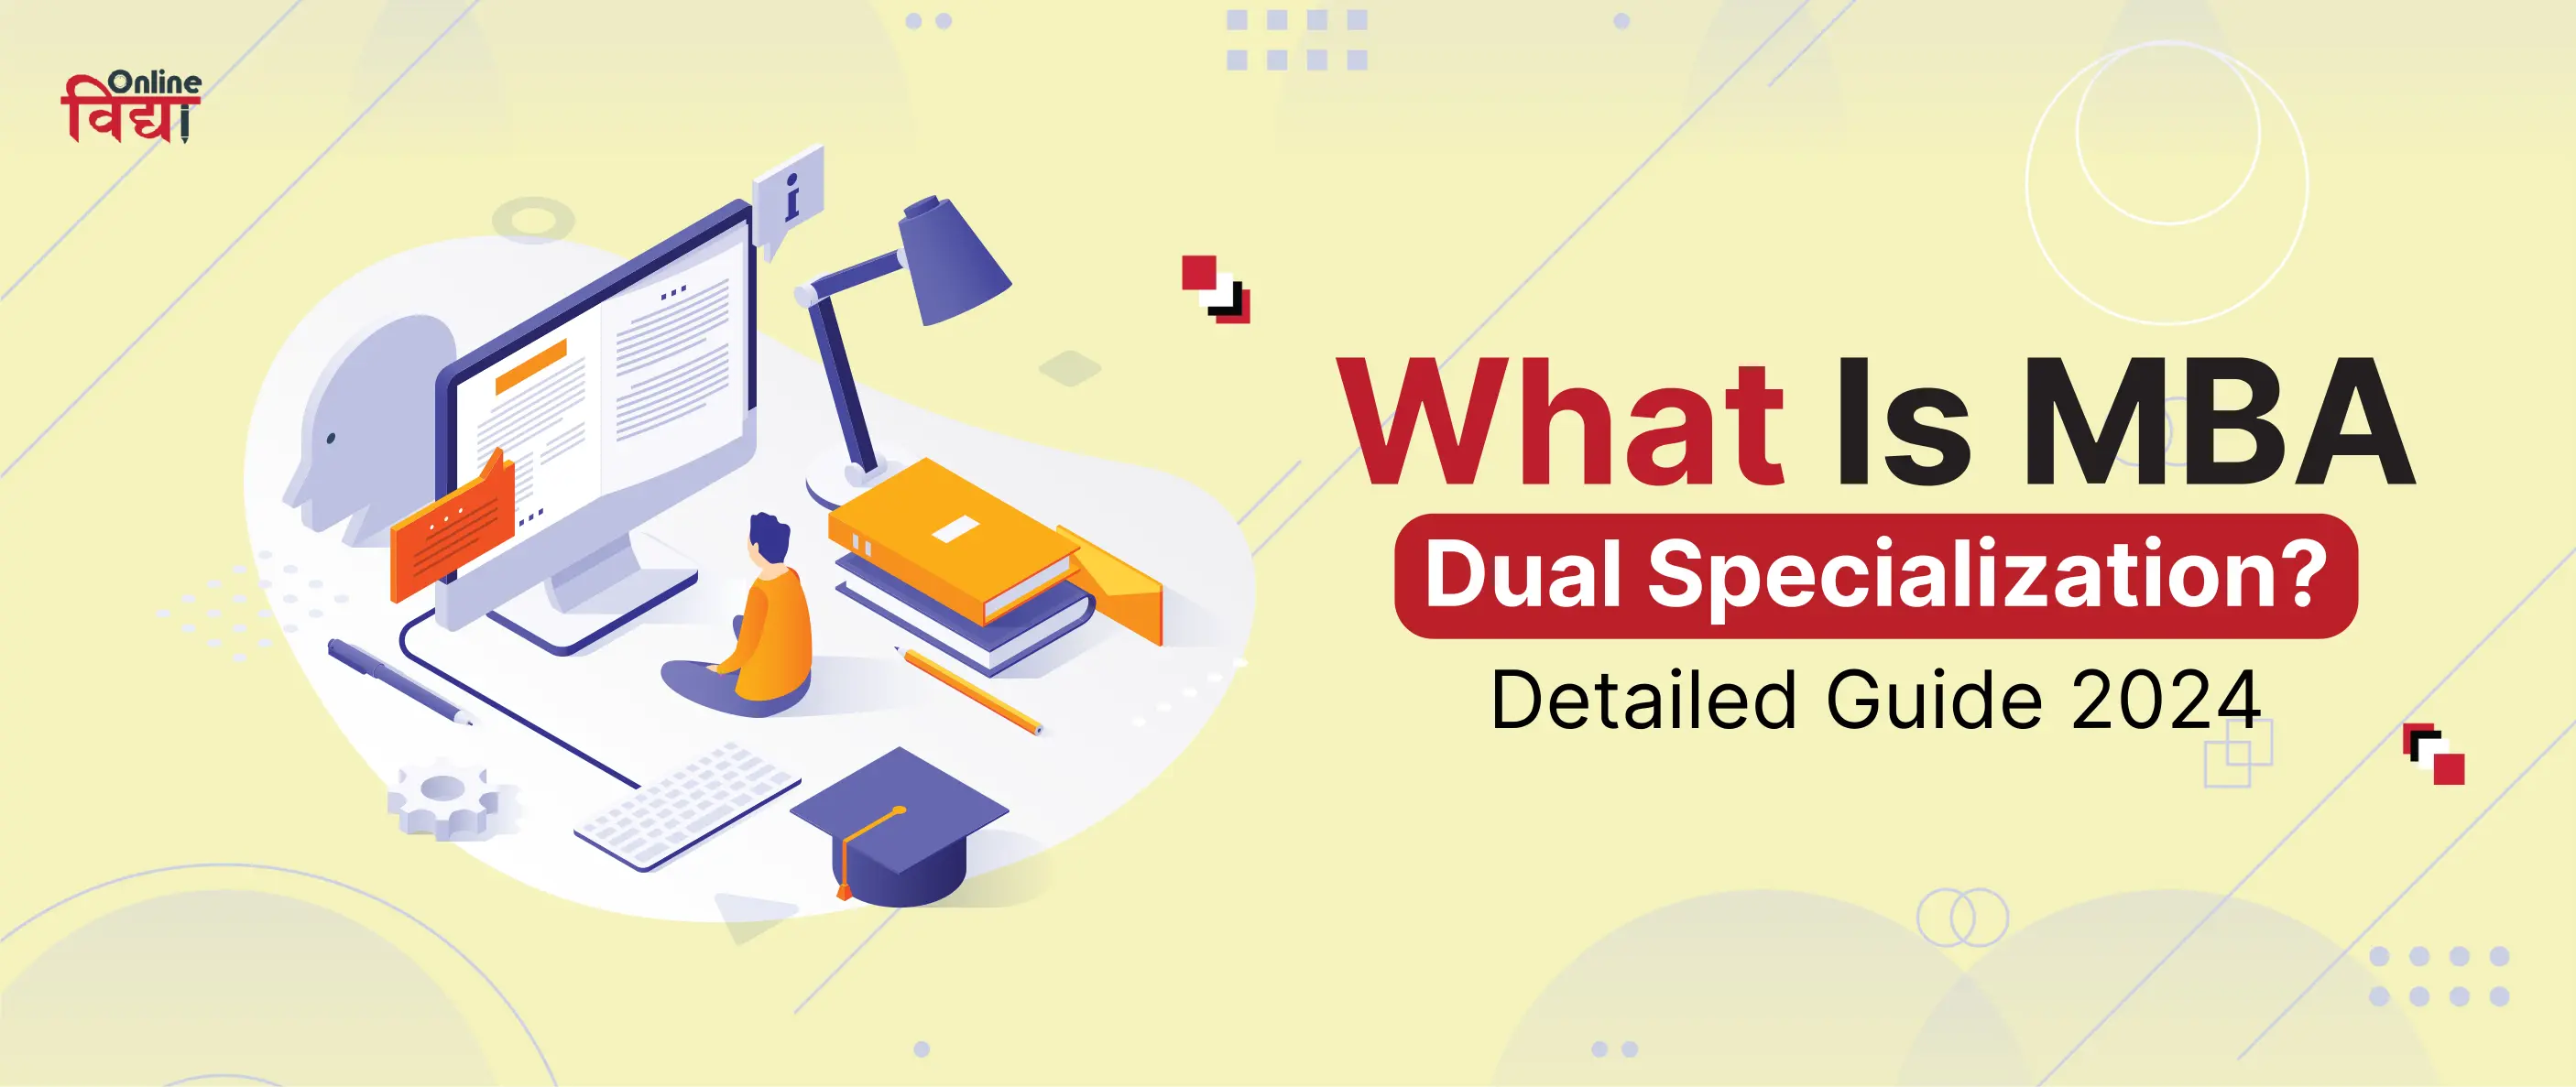 What Is MBA Dual Specialization? – Detailed Guide 2024